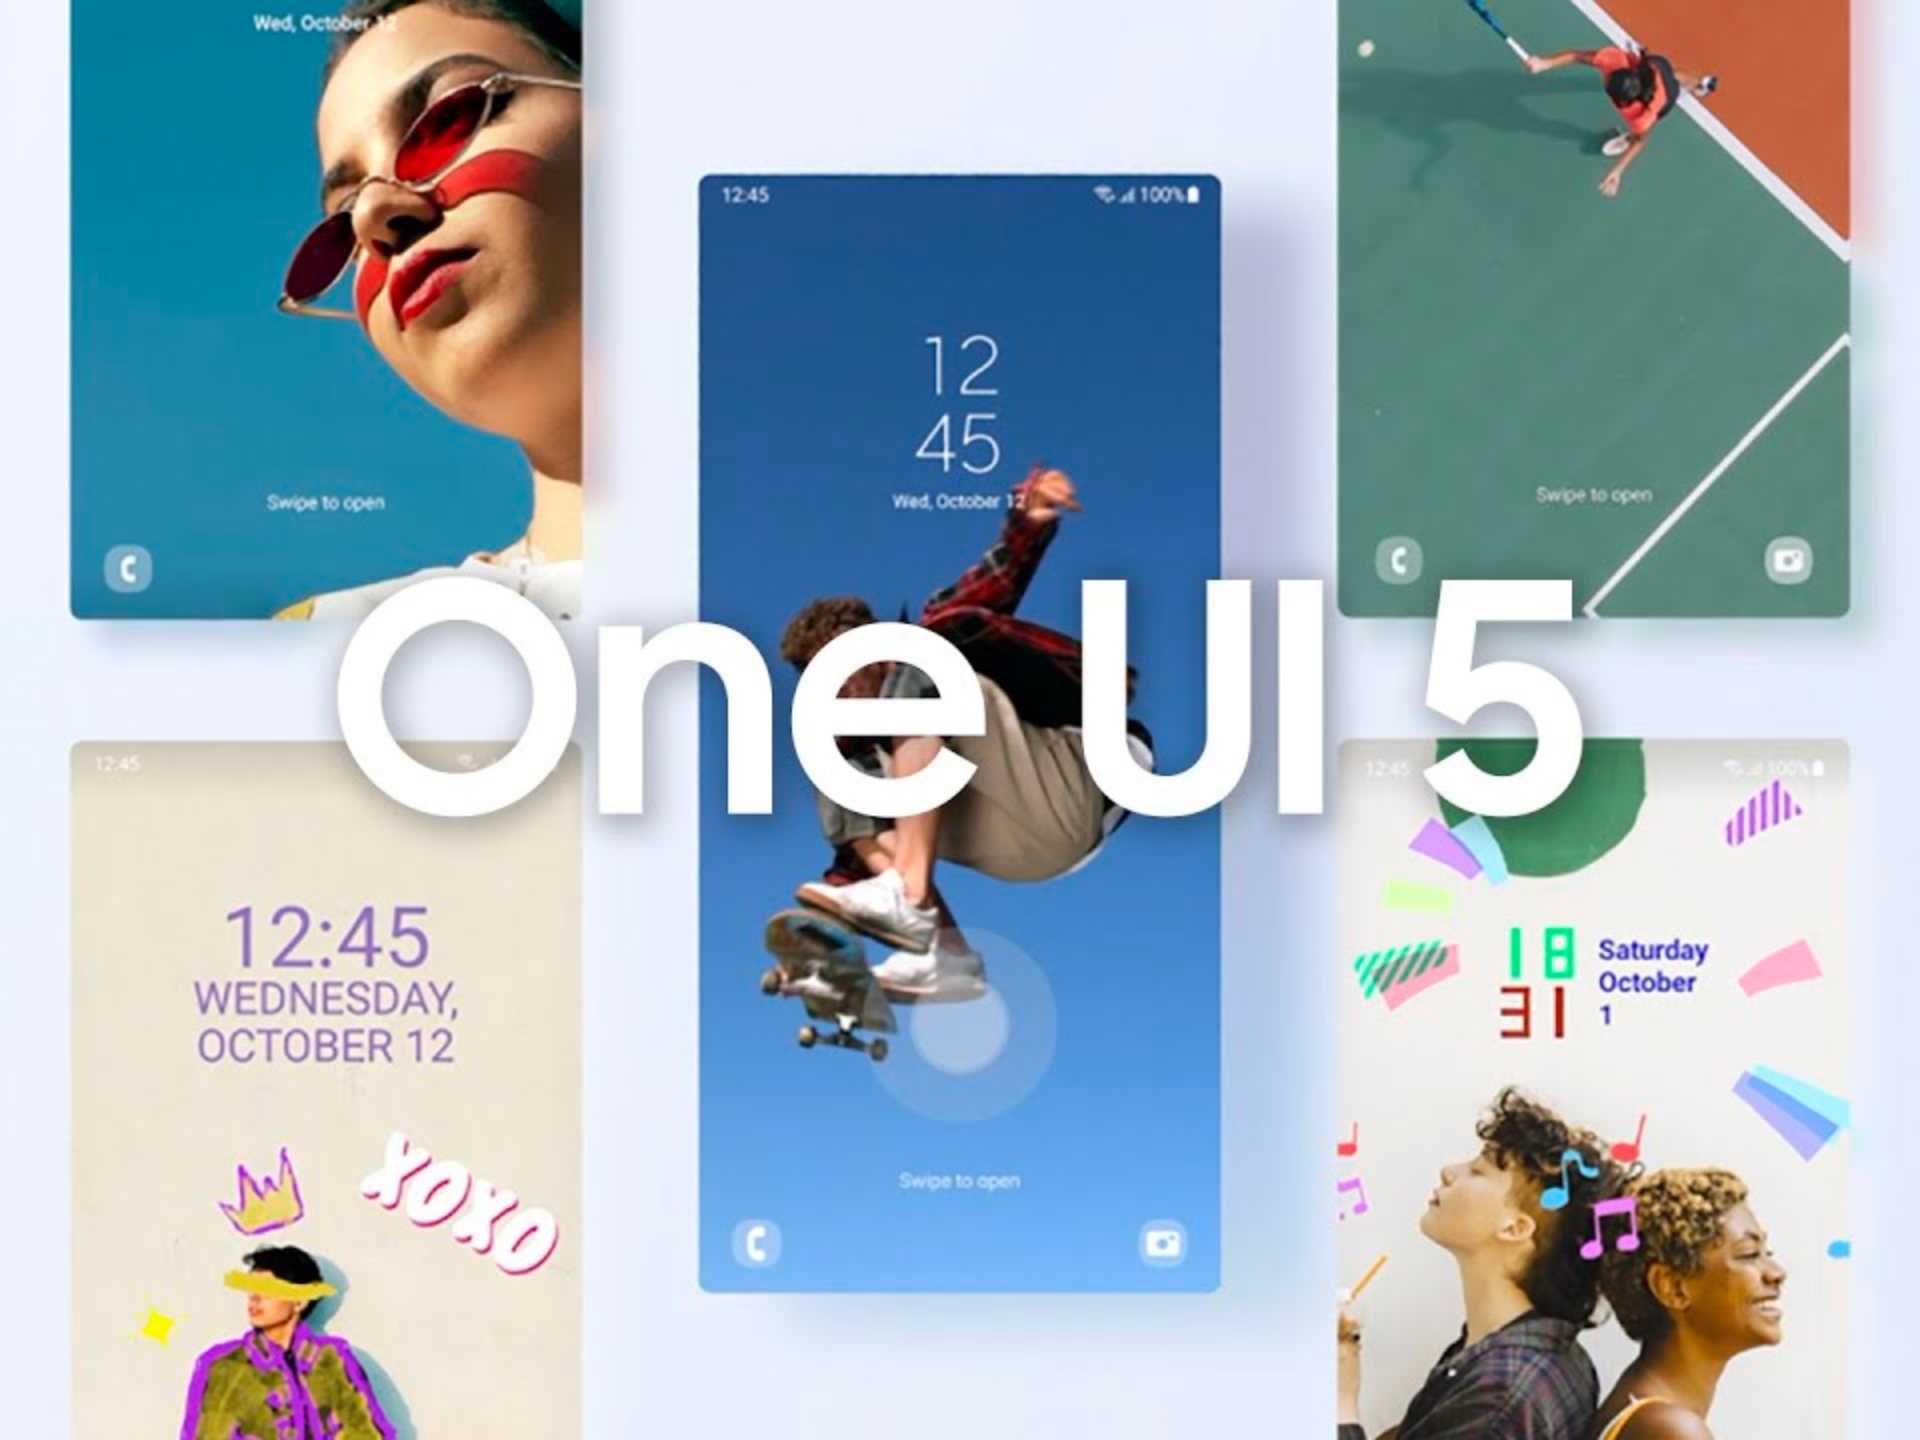 One UI 5 official image